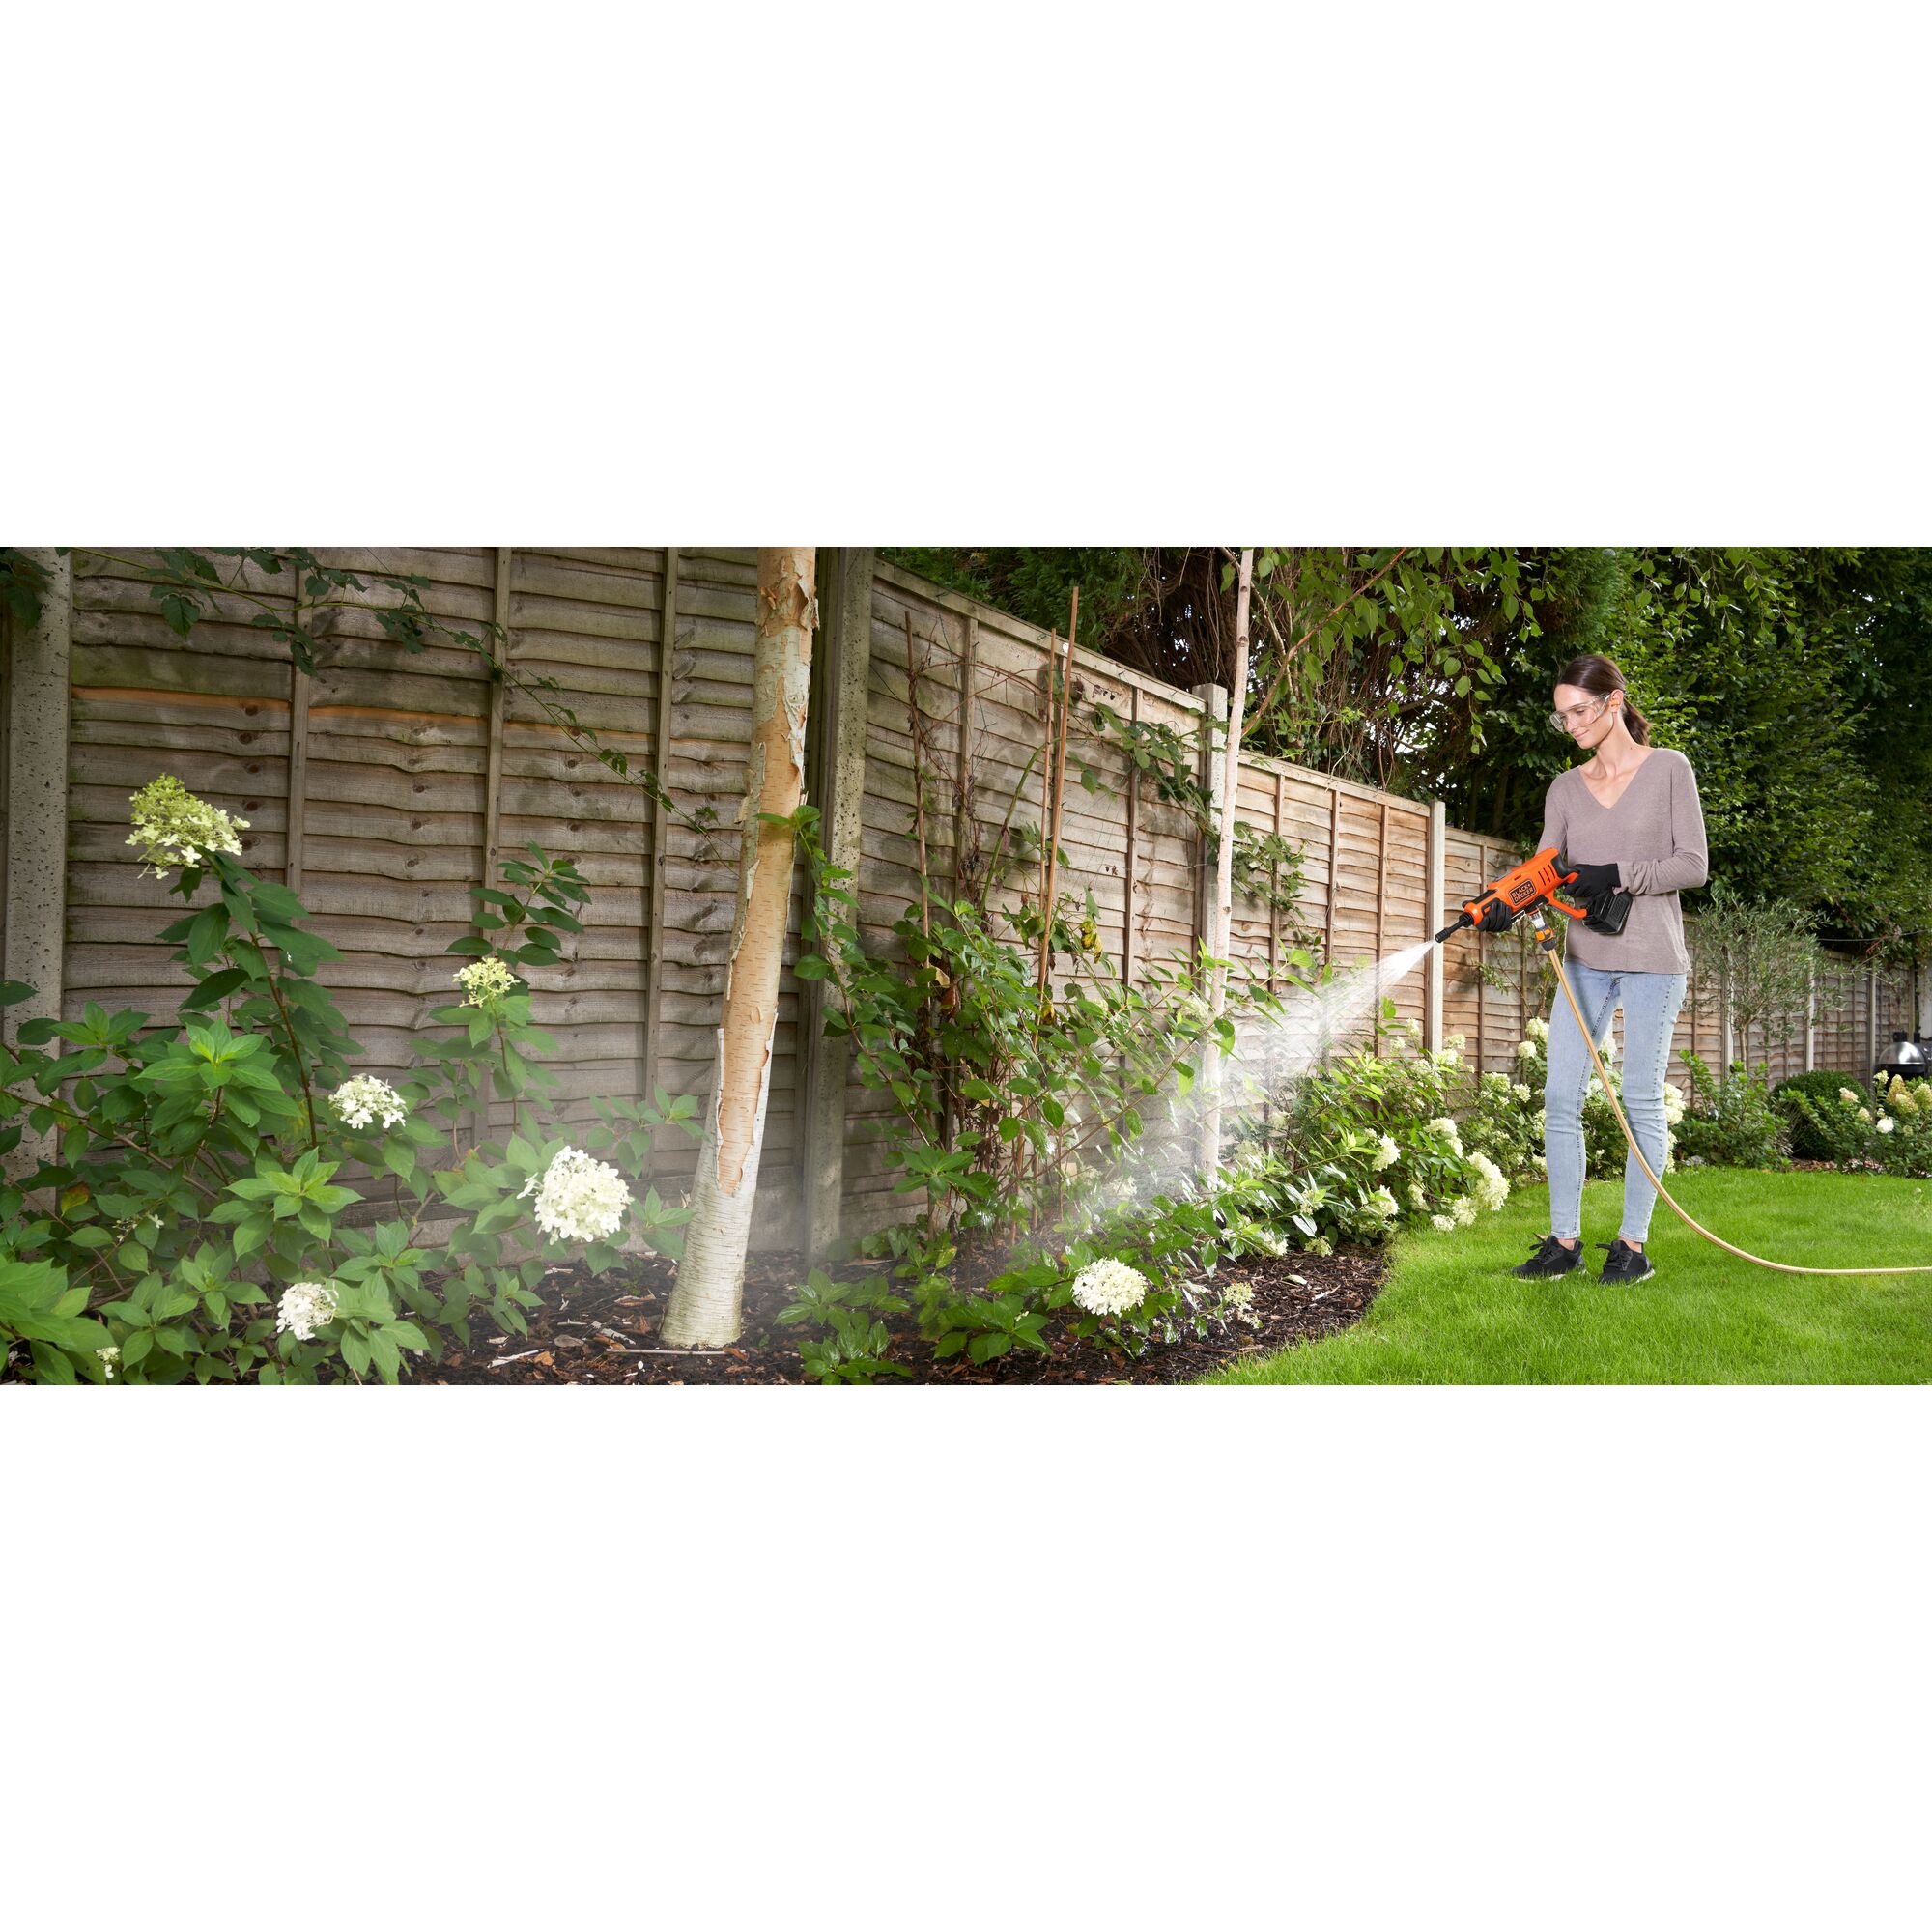 20 volt MAX cordless power cleaner kit being used by a person to water plants in the garden.